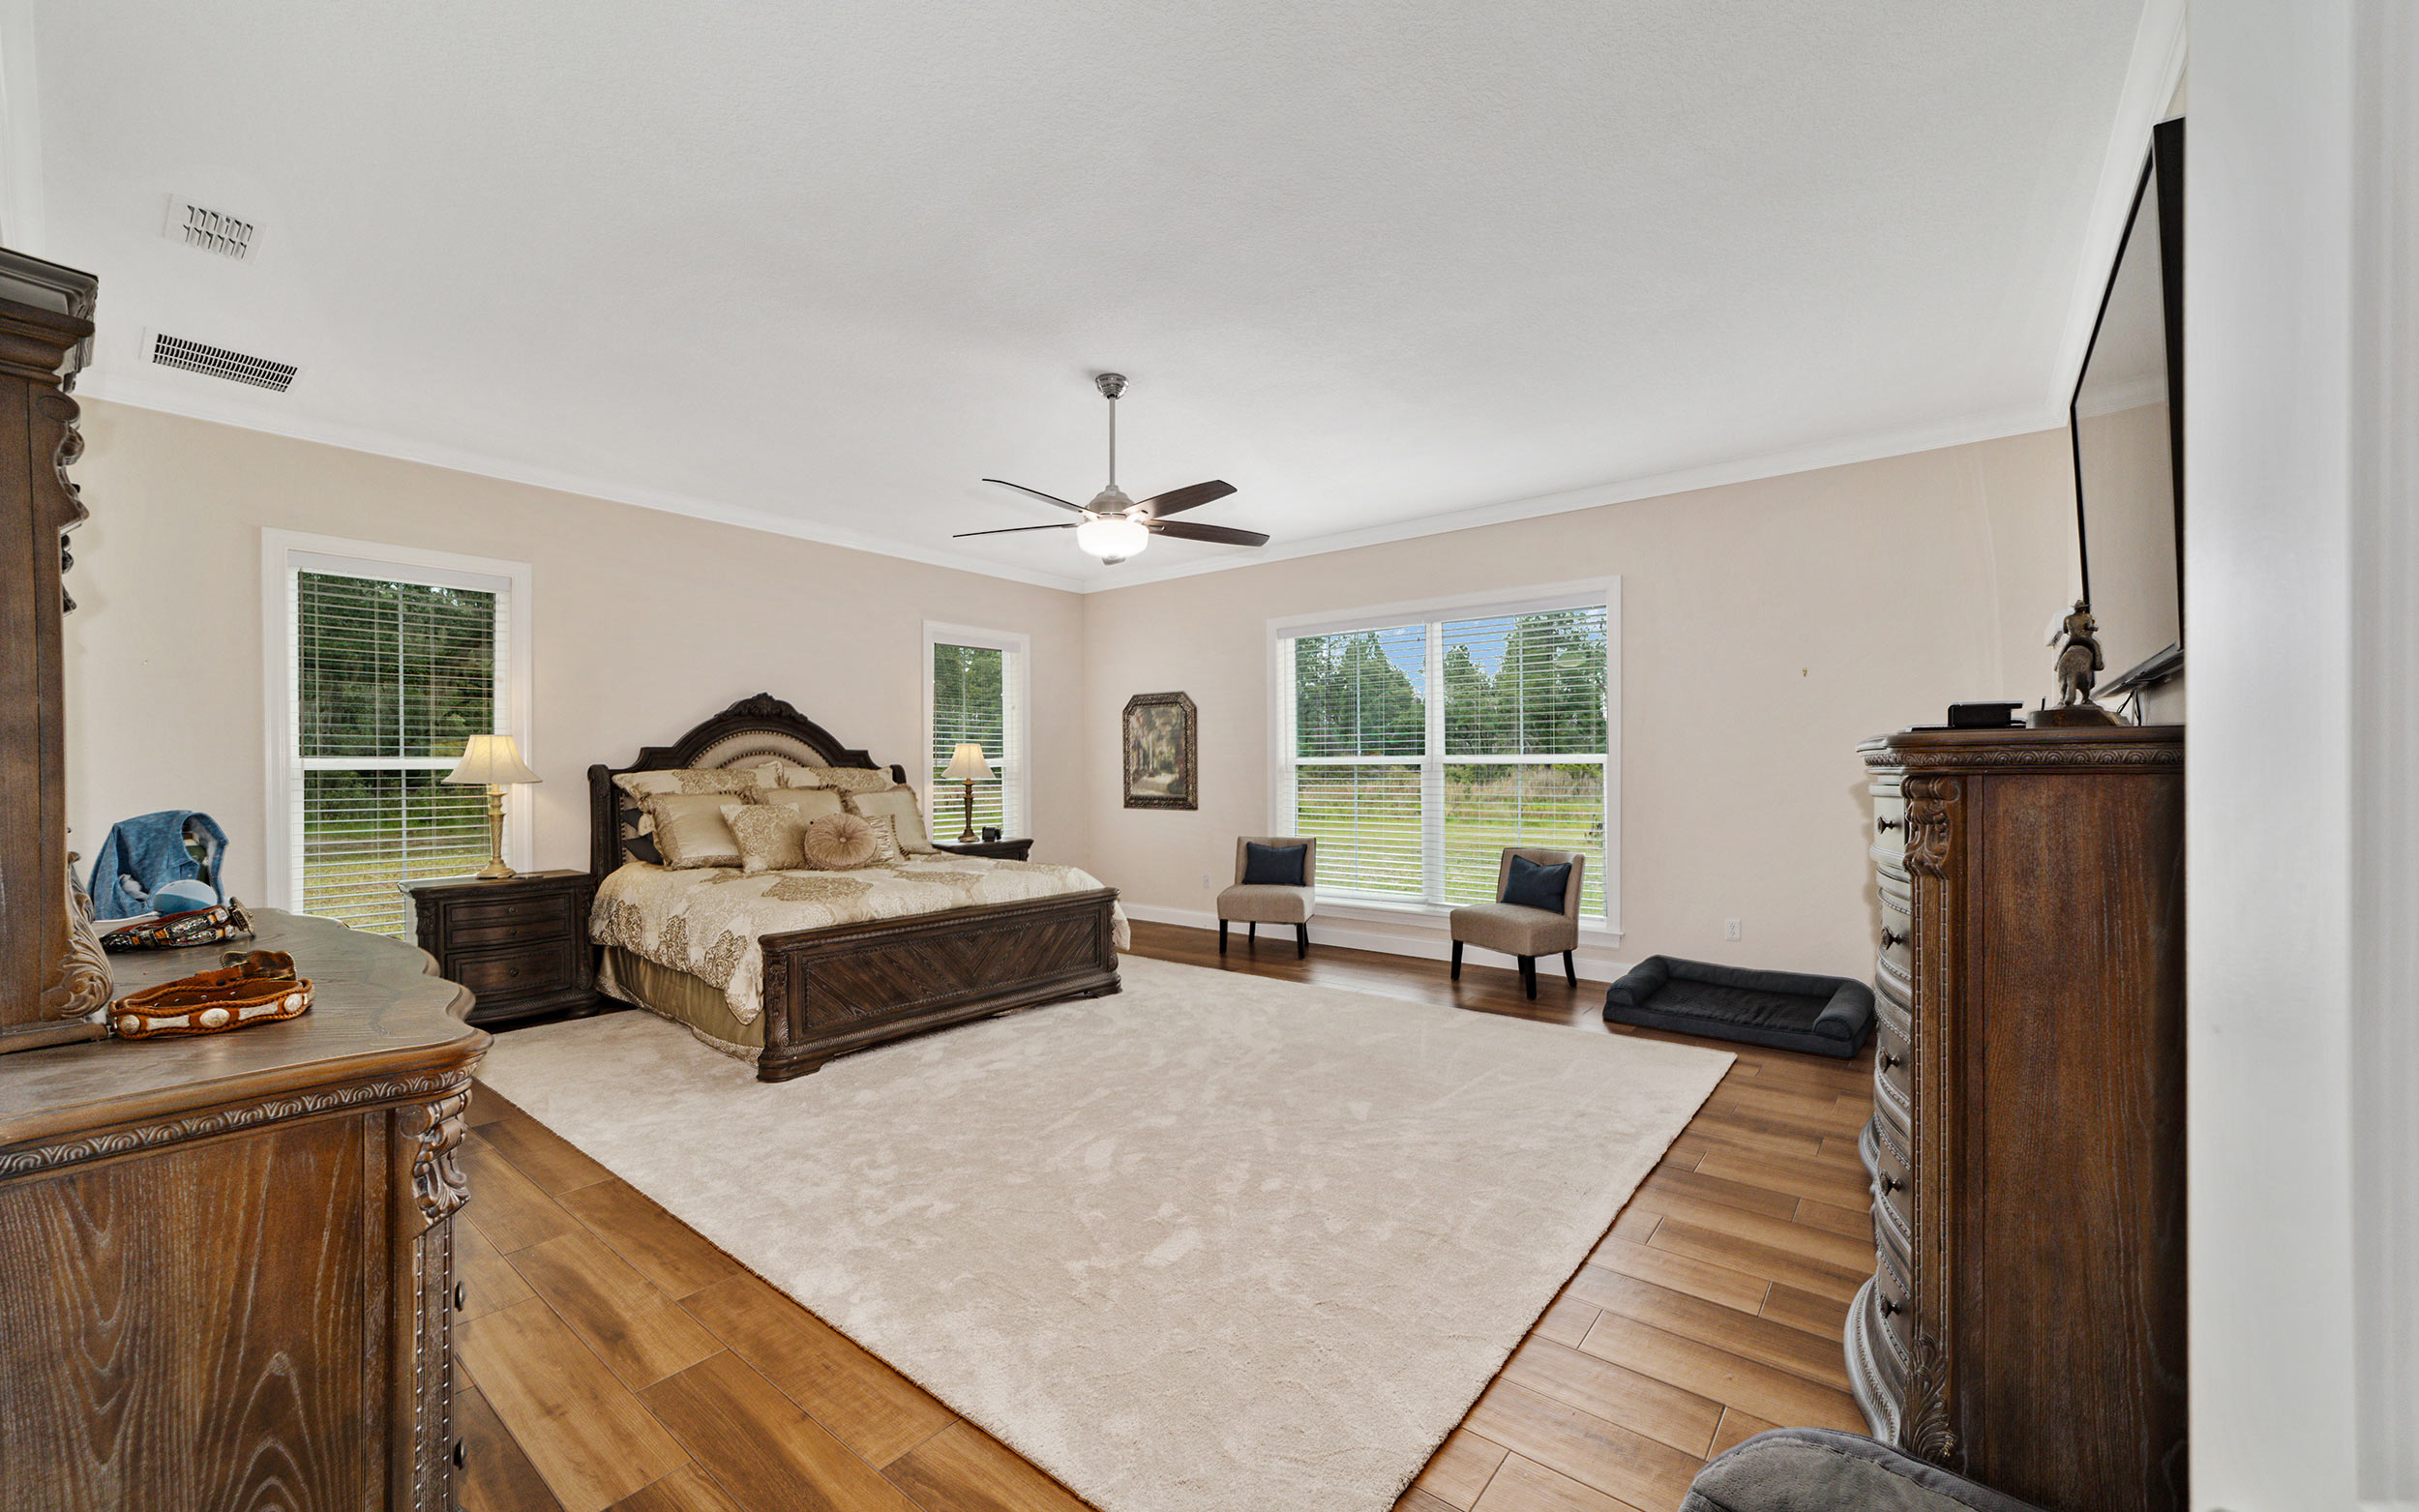 The spacious master bedroom.